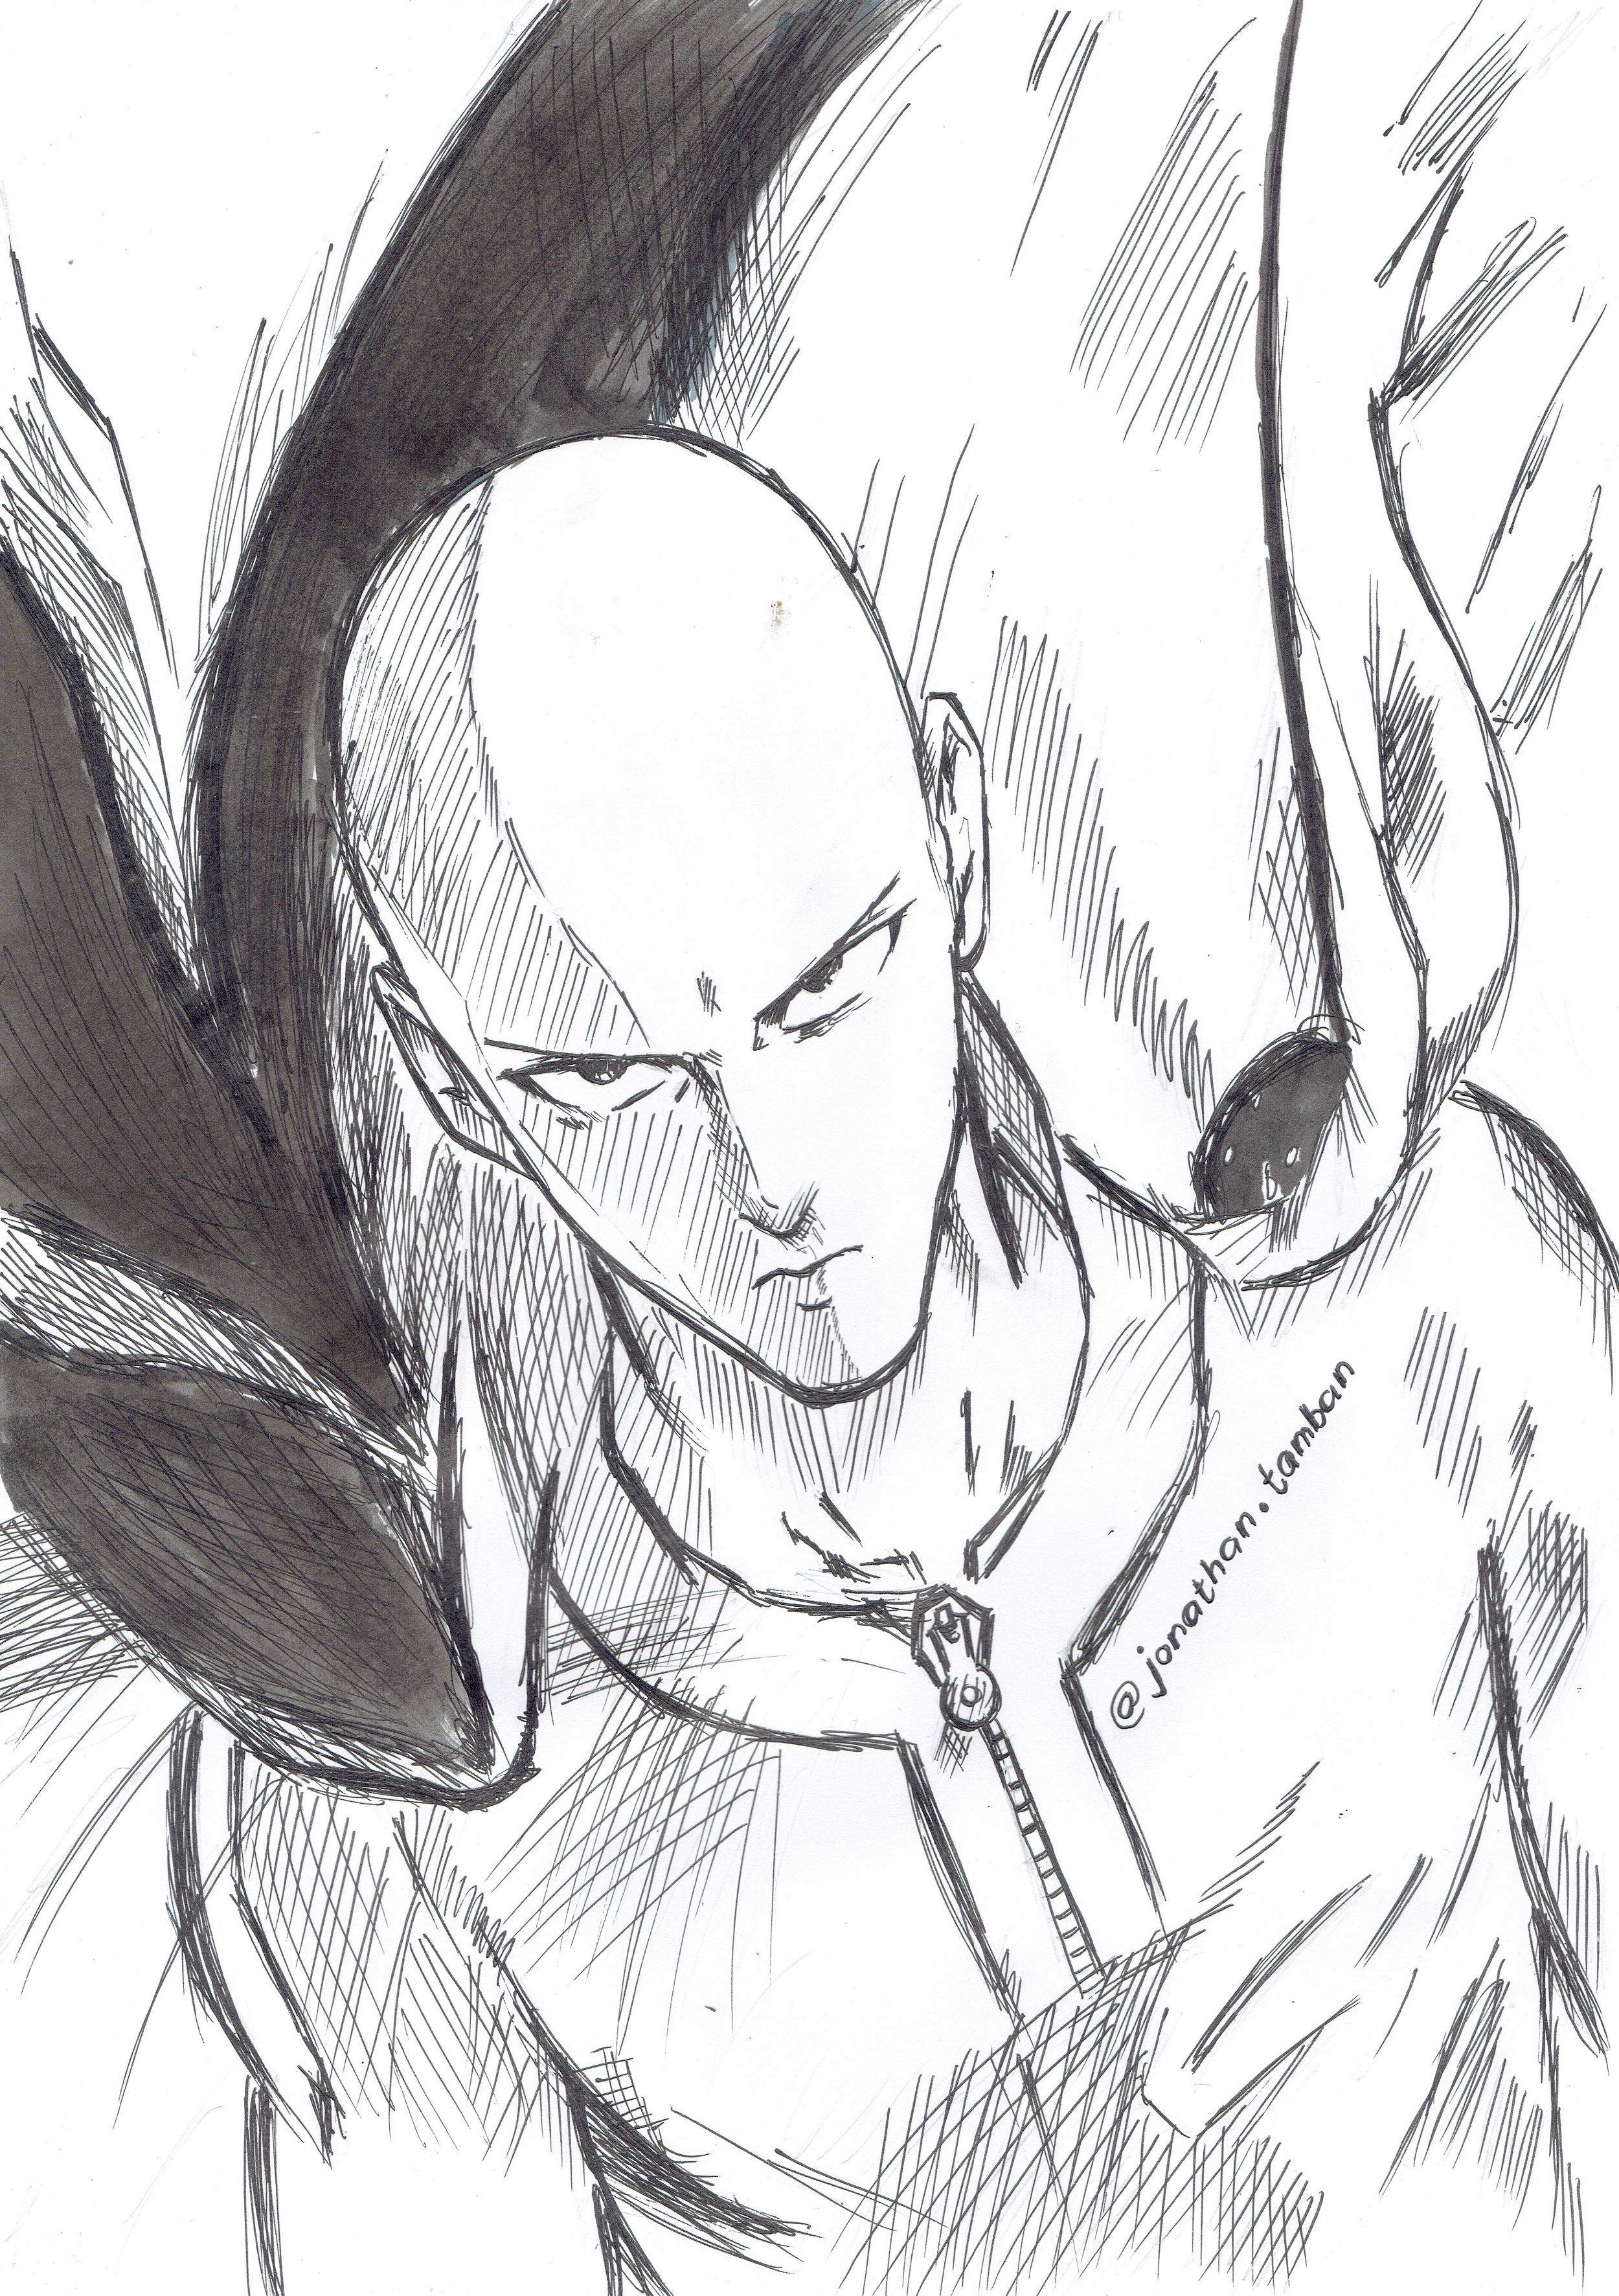 Come Up With One Punch Man Drawing - DIARY DRAWING IMAGES